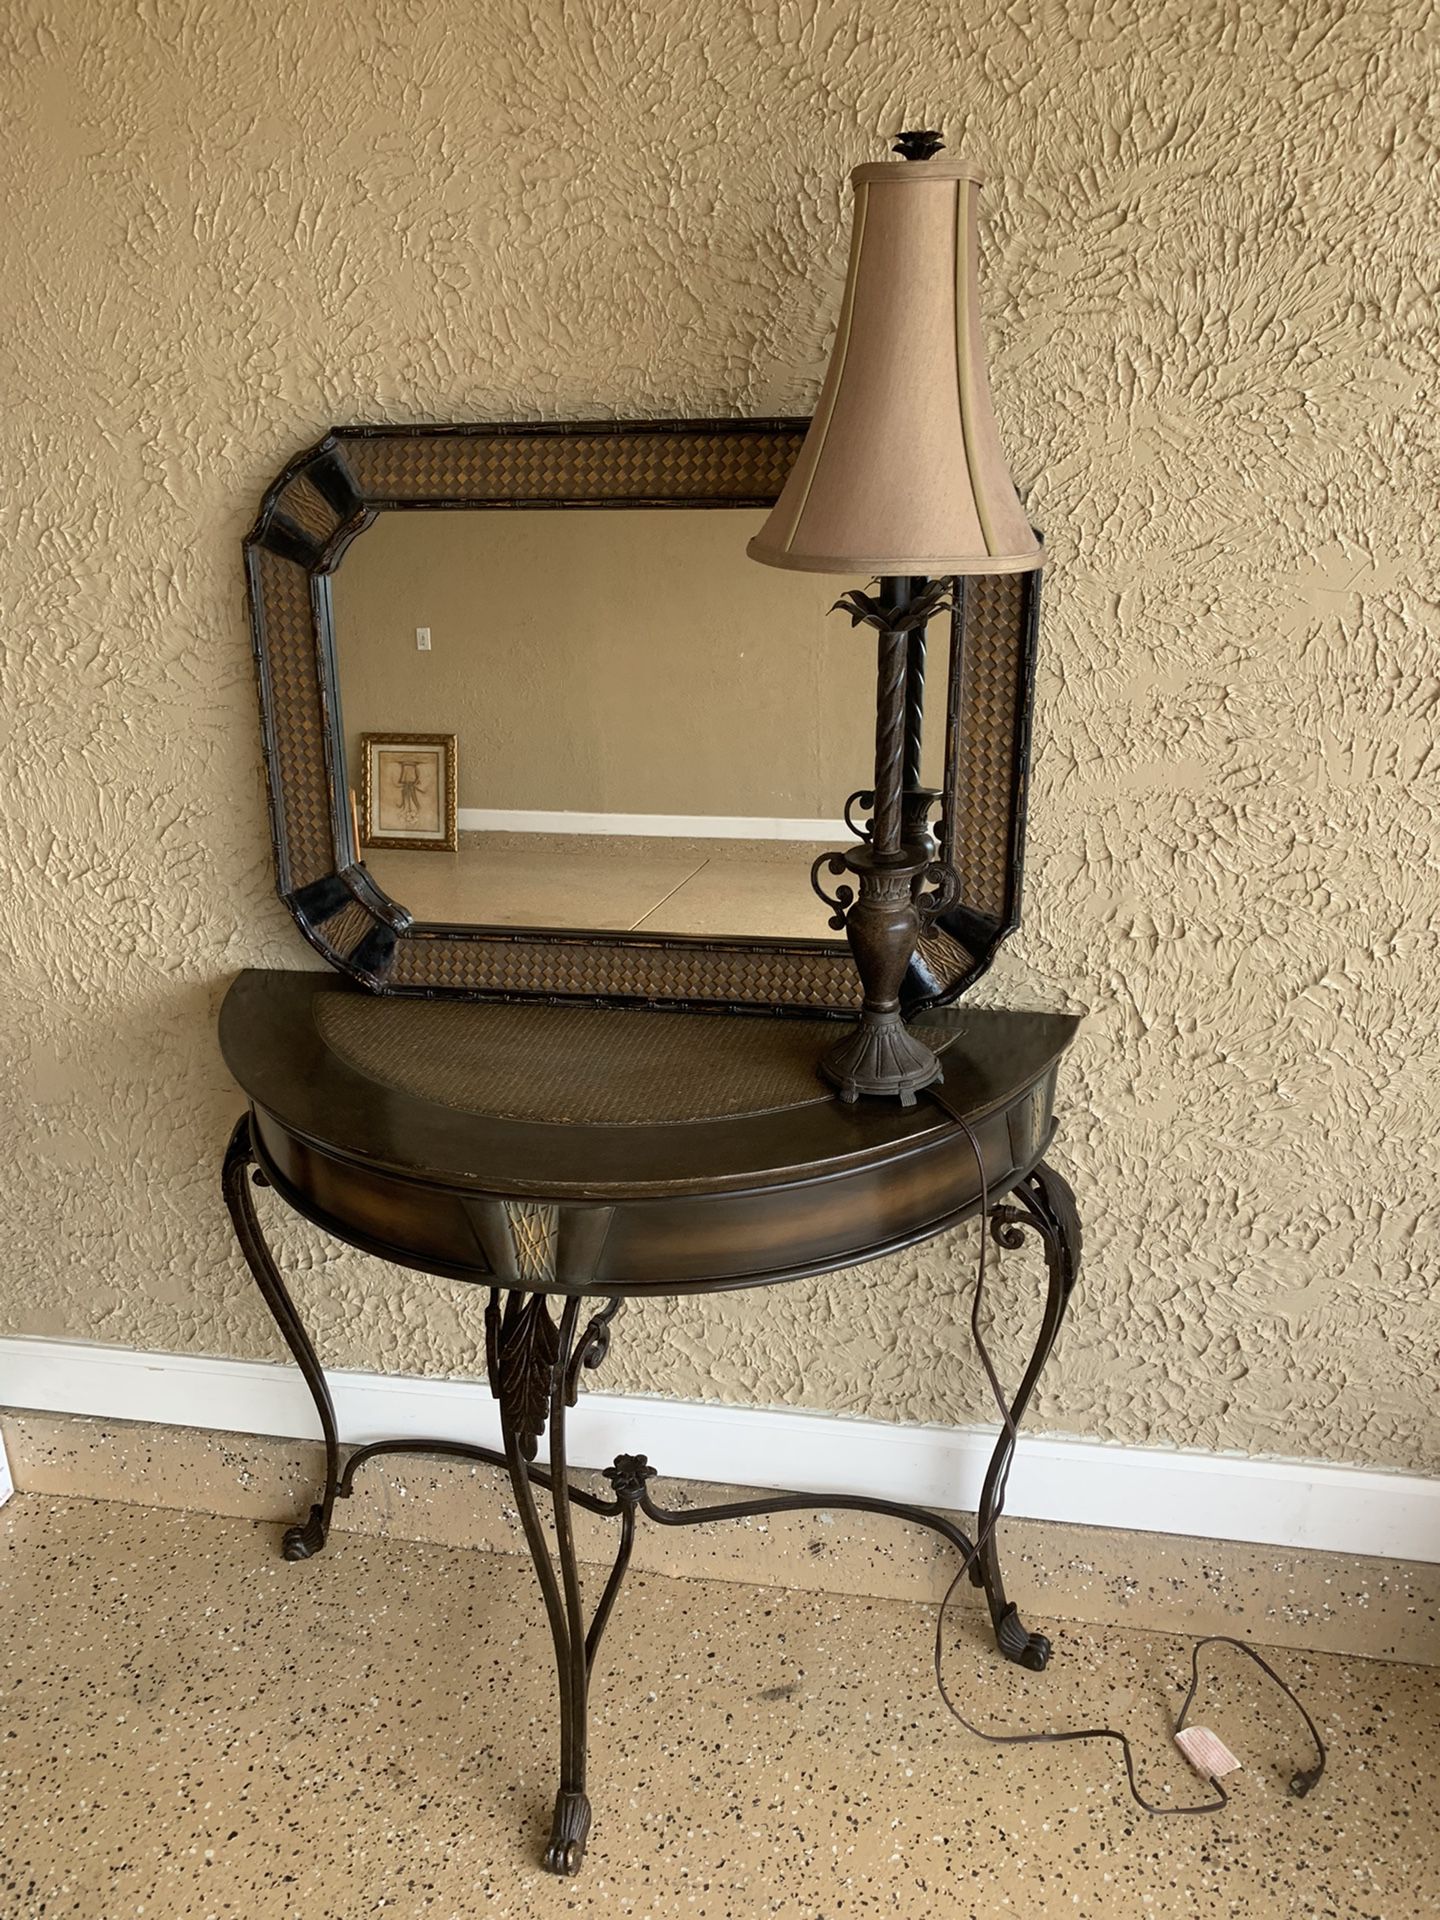 Hall Table With Mirror And Lamps L-3ft-2.5in-H-2ft-8in-W-1ft-4.5in-Mirror -W-2ft-8.5in-L-2ft